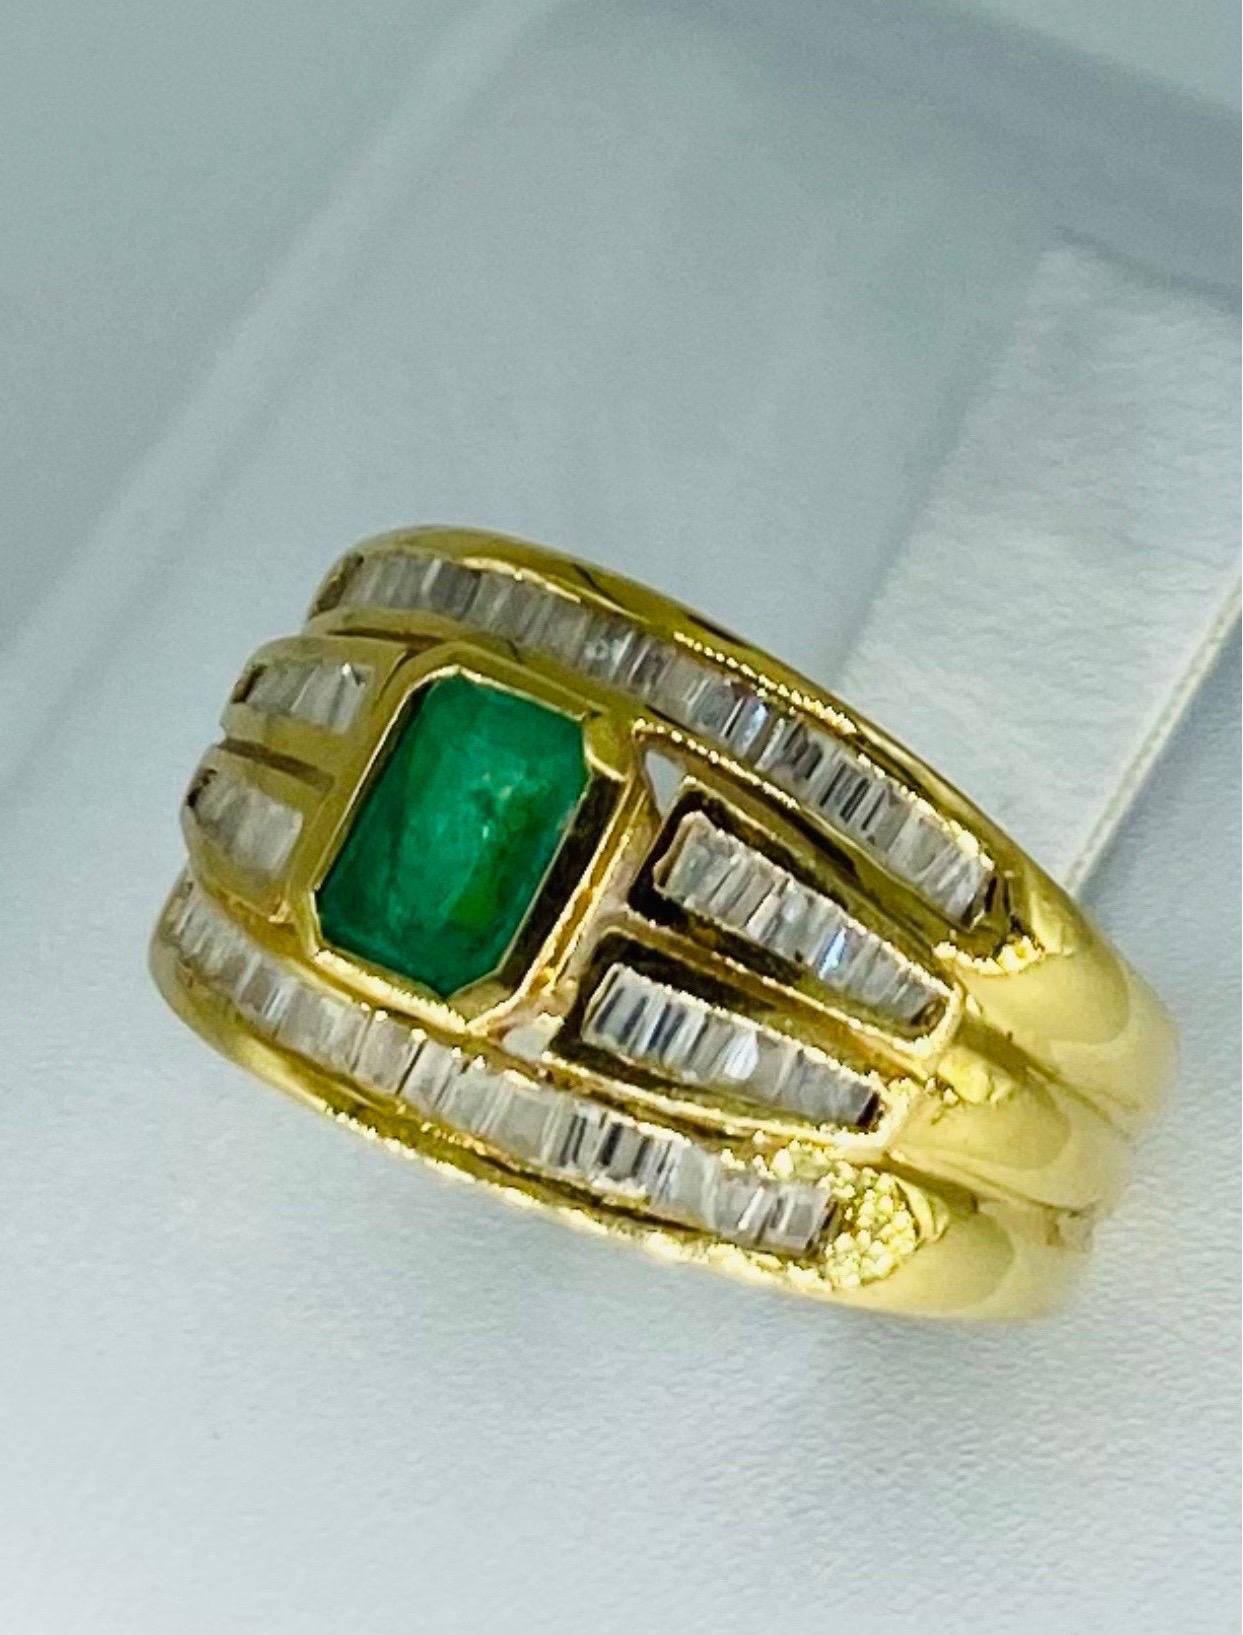 Vintage 1.20 Carat Emerald and Diamonds 4-Row Ring 18k Gold In Excellent Condition For Sale In Miami, FL